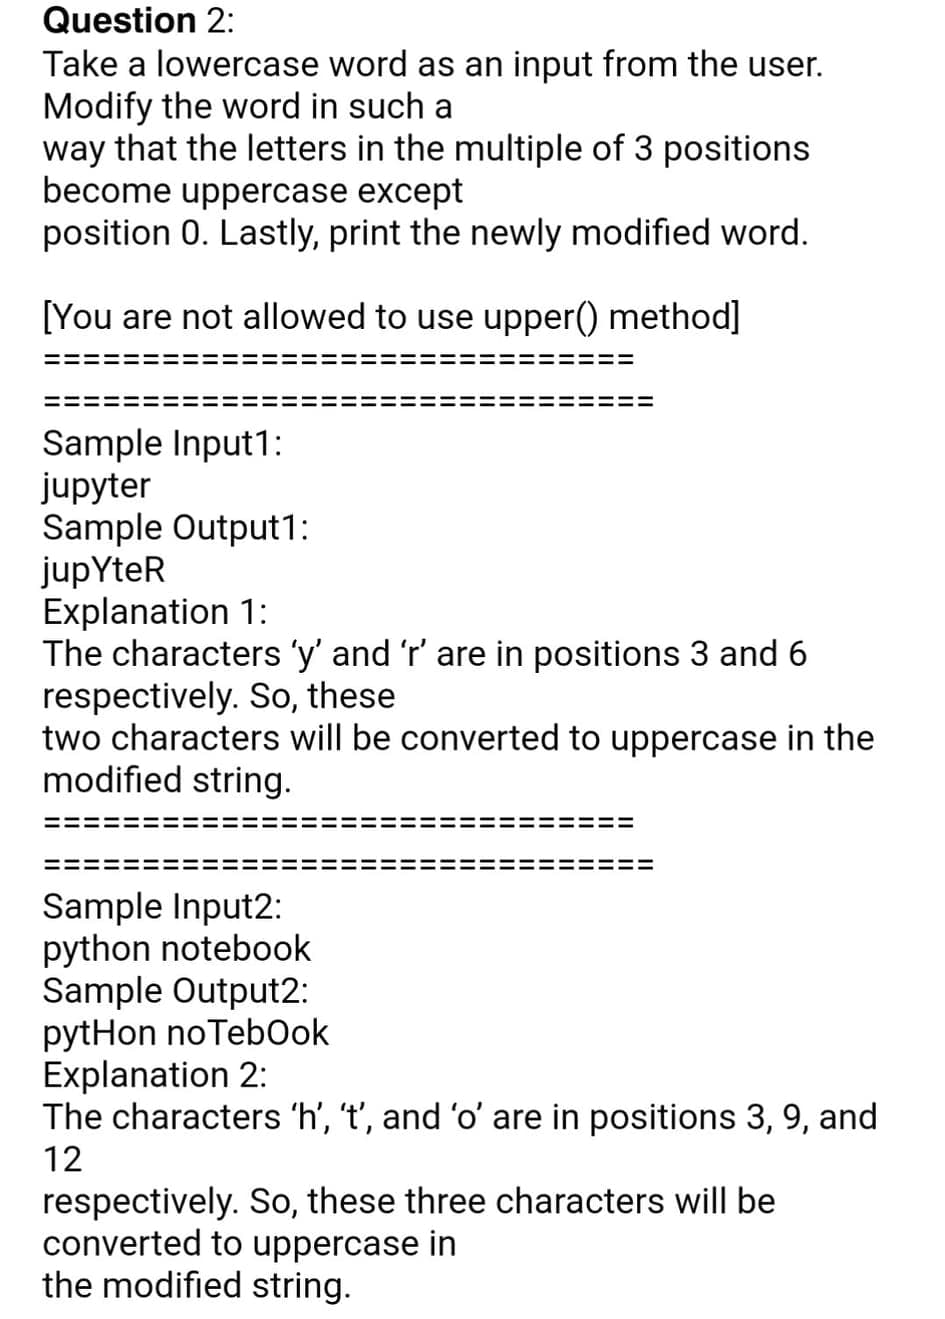 Question 2:
Take a lowercase word as an input from the user.
Modify the word in such a
way that the letters in the multiple of 3 positions
become uppercase except
position 0. Lastly, print the newly modified word.
[You are not allowed to use upper() method]
Sample Input1:
jupyter
Sample Output1:
jupYteR
Explanation 1:
The characters 'y' and 'r' are in positions 3 and 6
respectively. So, these
two characters will be converted to uppercase in the
modified string.
Sample Input2:
python notebook
Sample Output2:
pytHon noTebOok
Explanation 2:
The characters 'h', 't', and 'o' are in positions 3, 9, and
12
respectively. So, these three characters will be
converted to uppercase in
the modified string.
